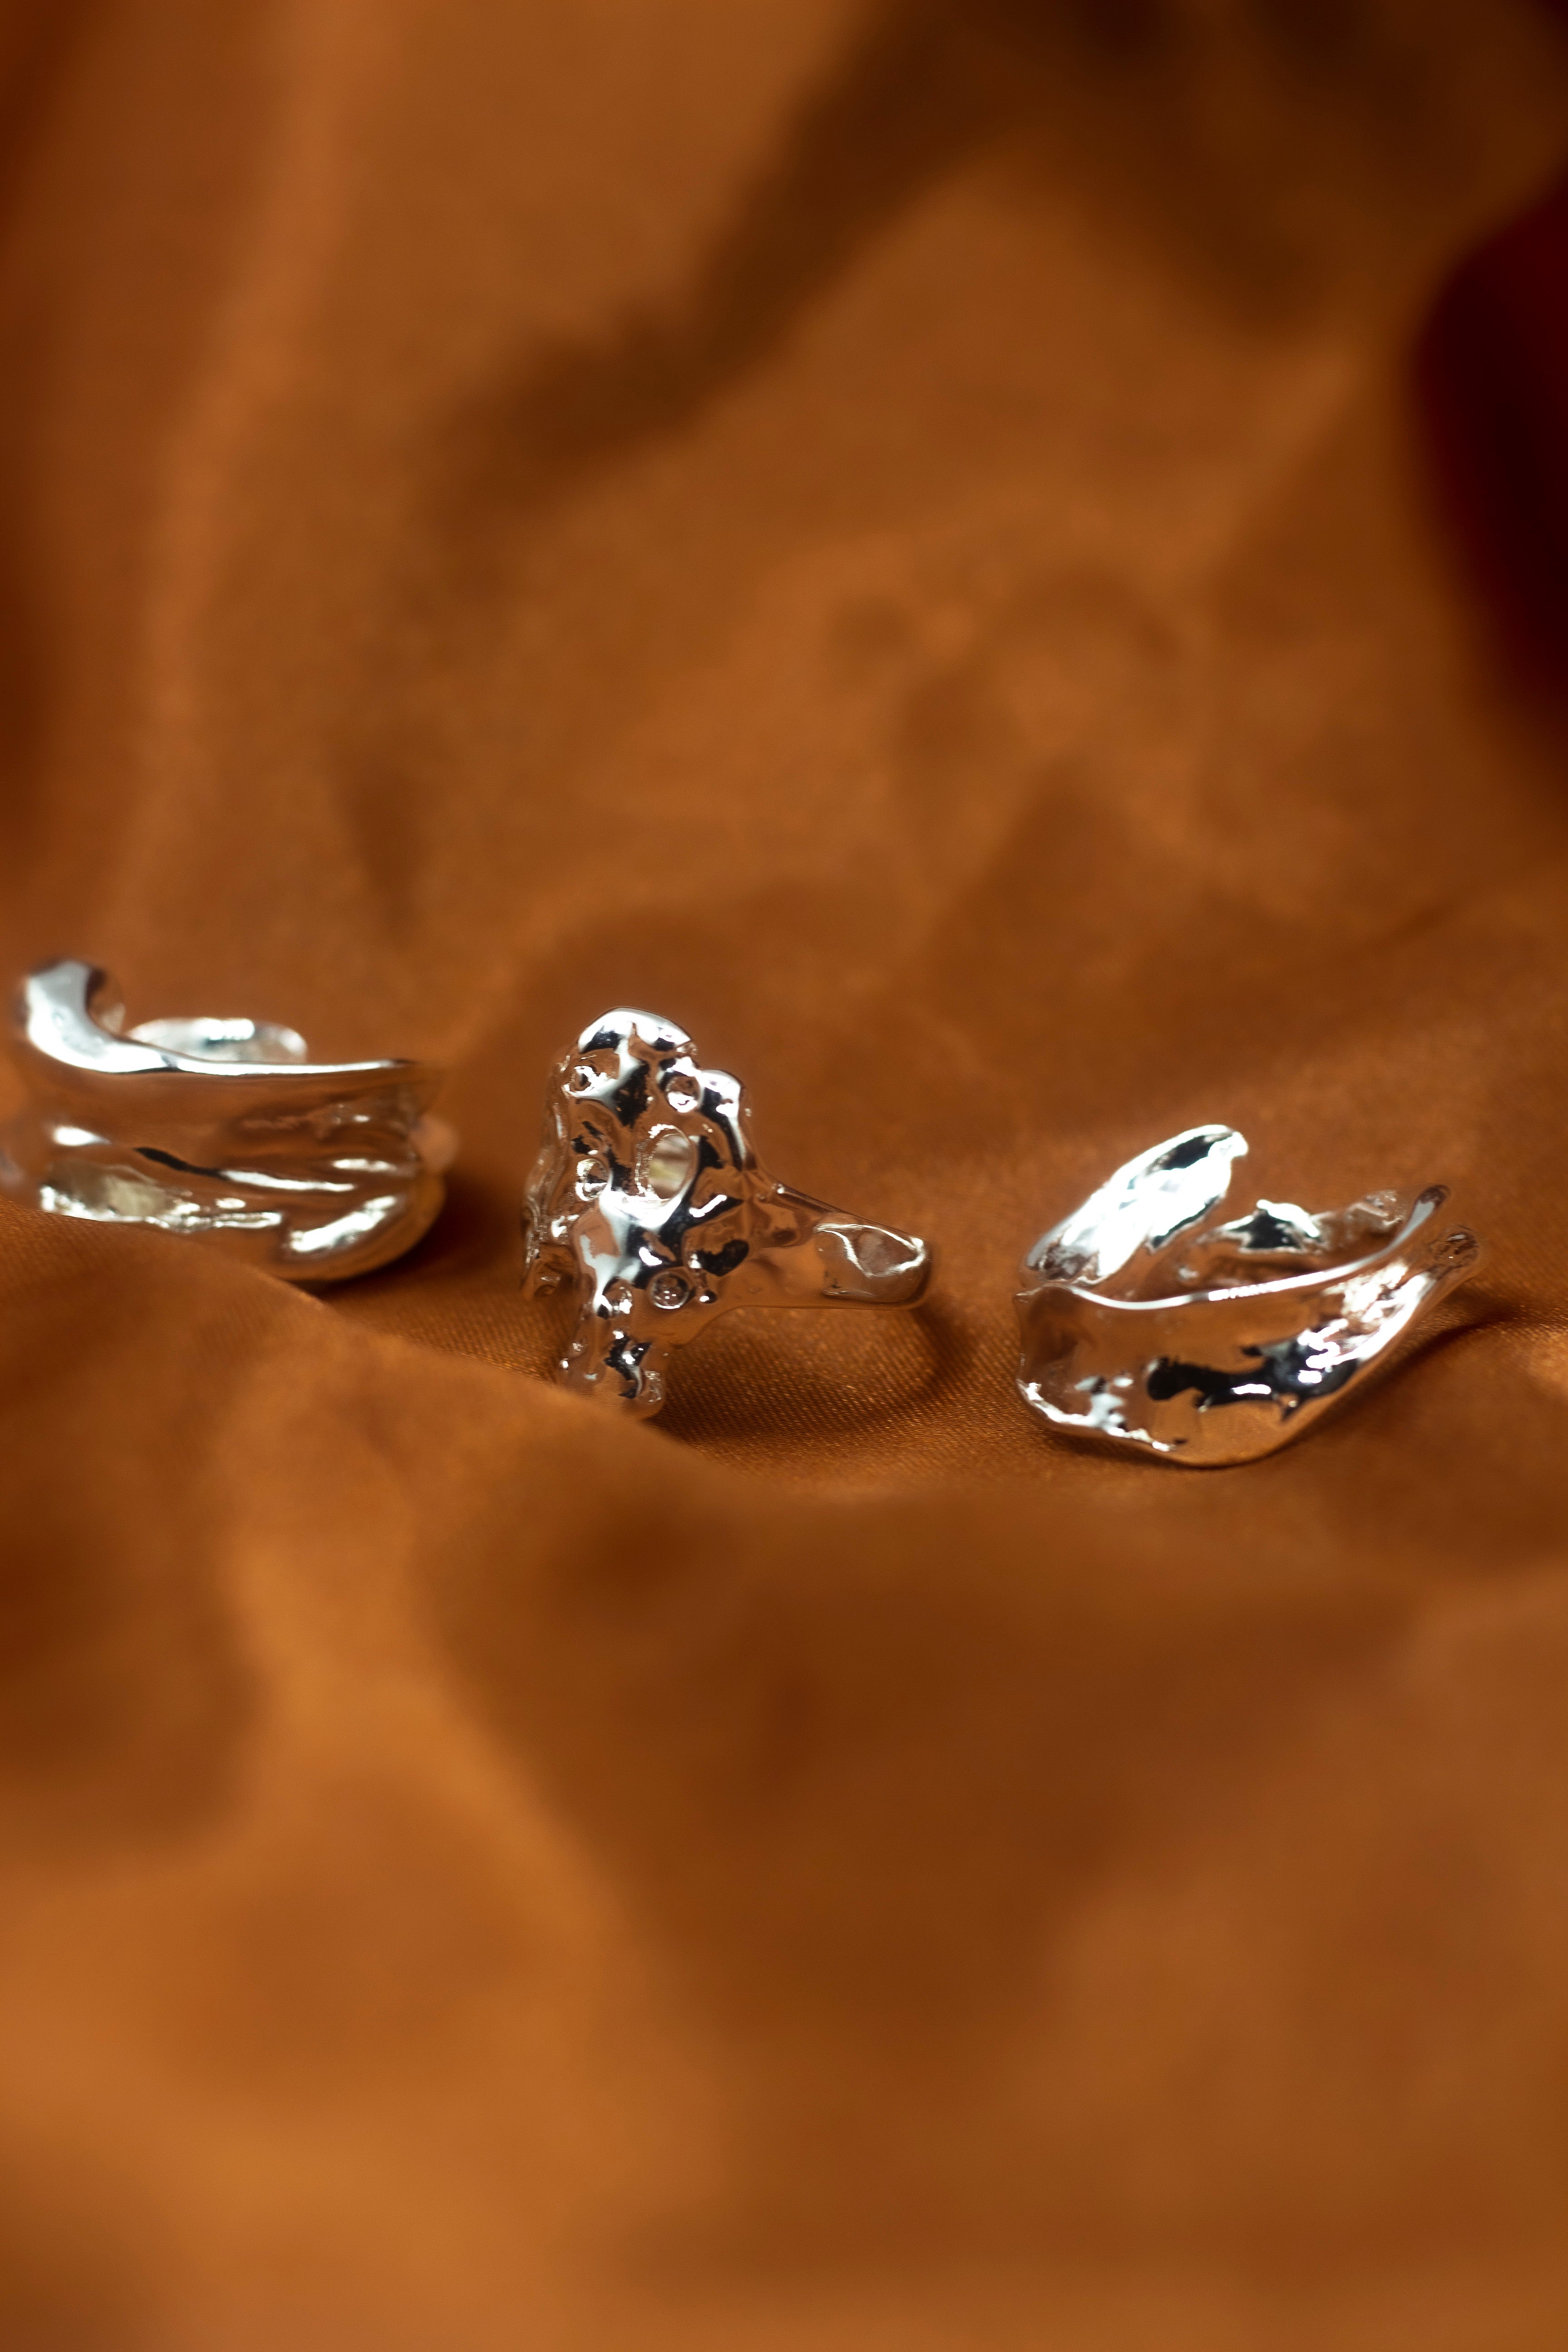 18k silver molten rings place side-by-side on an orange cloth. Ella Lava Ring Trio (Set of 3) by E's Element.